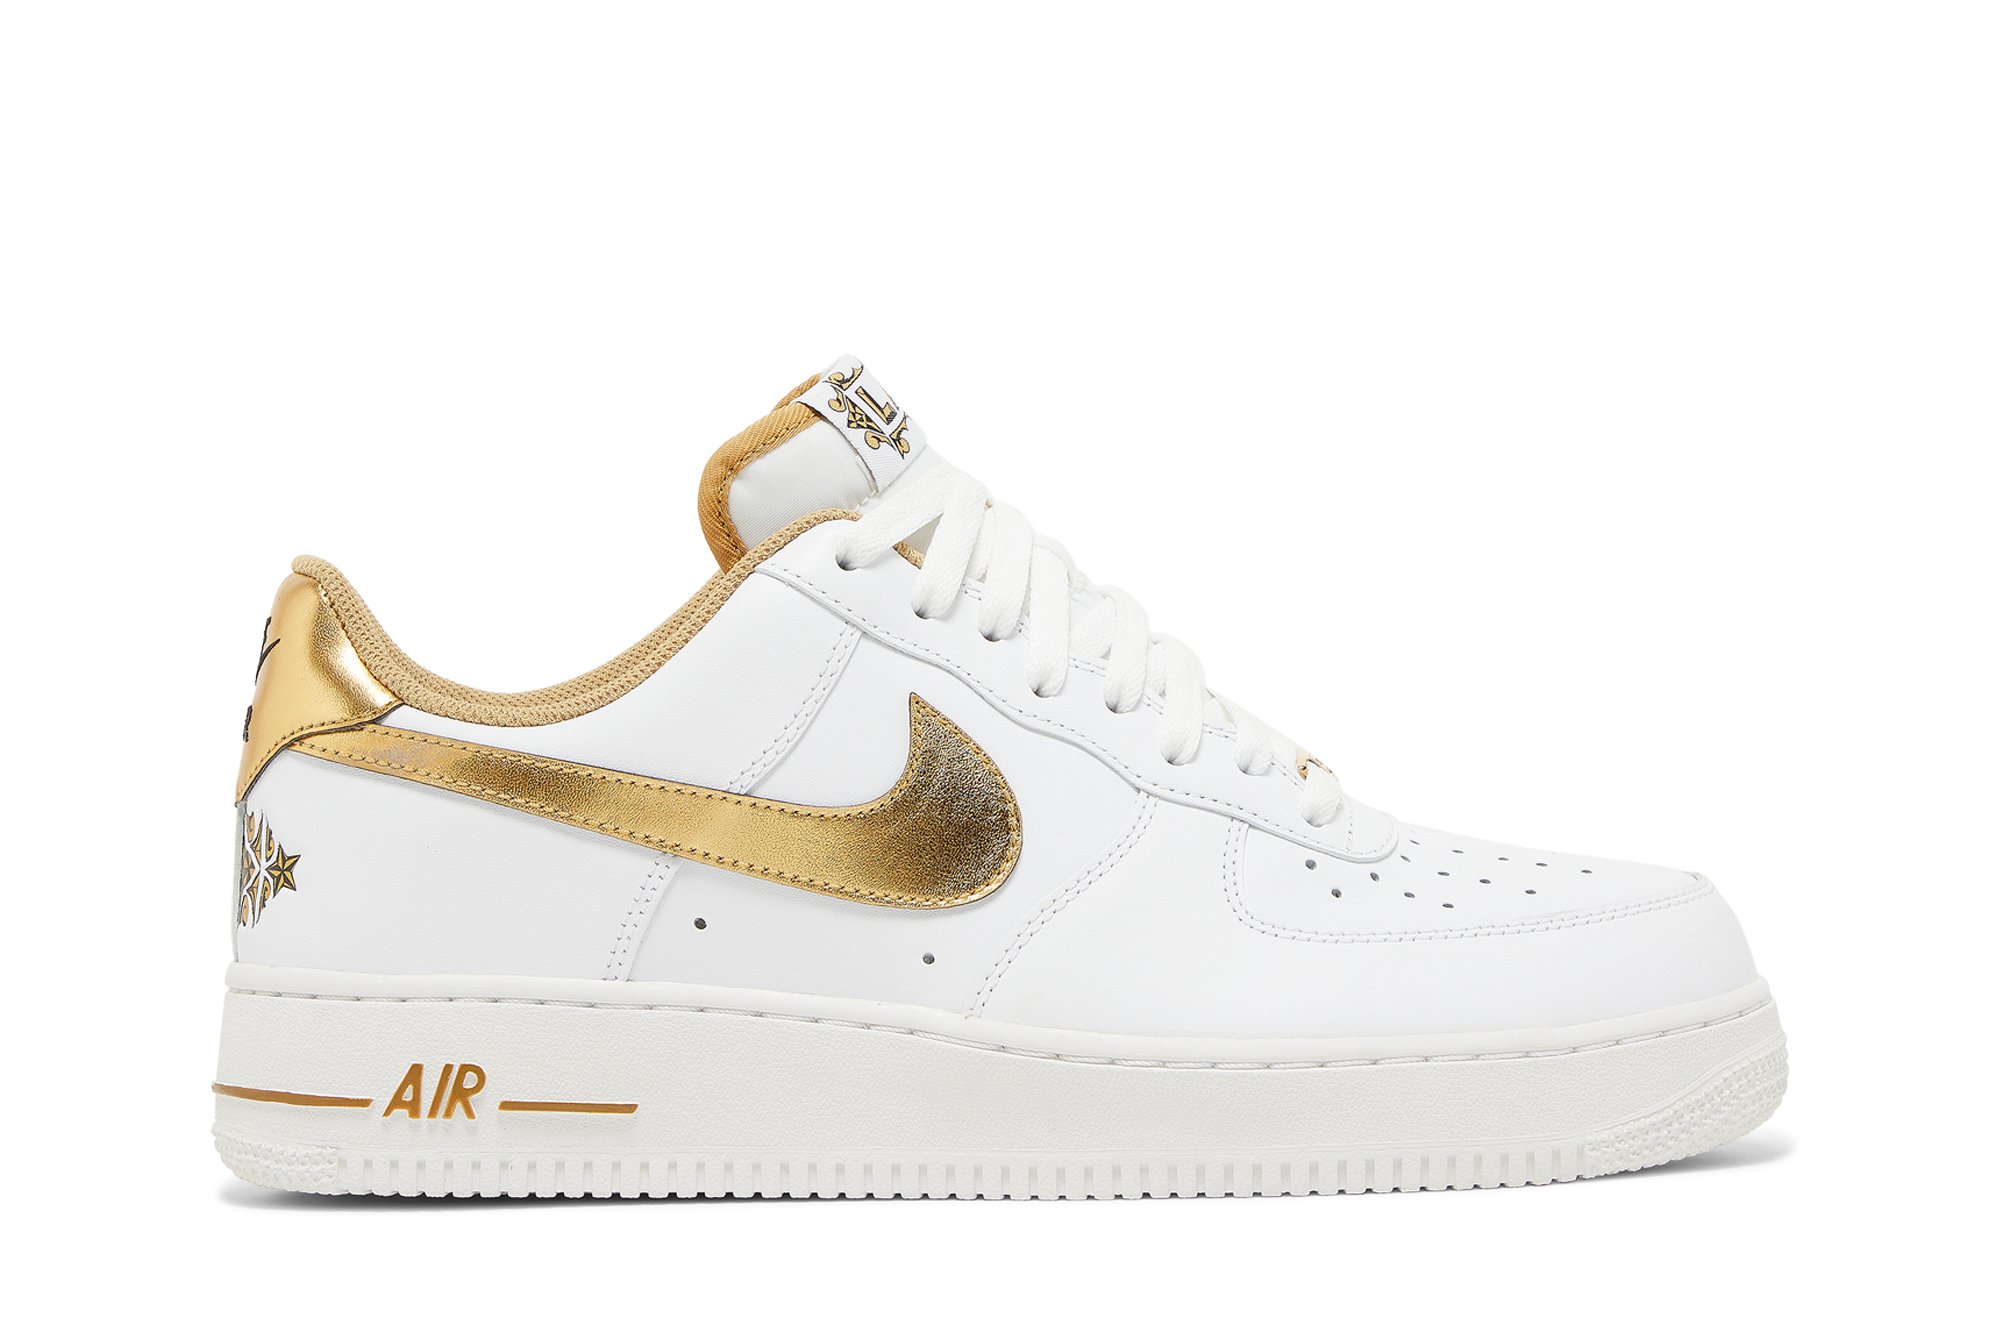 Buy Air Force 1 '07 'All-Star 2011 Hollywood' - 315122 180 | GOAT